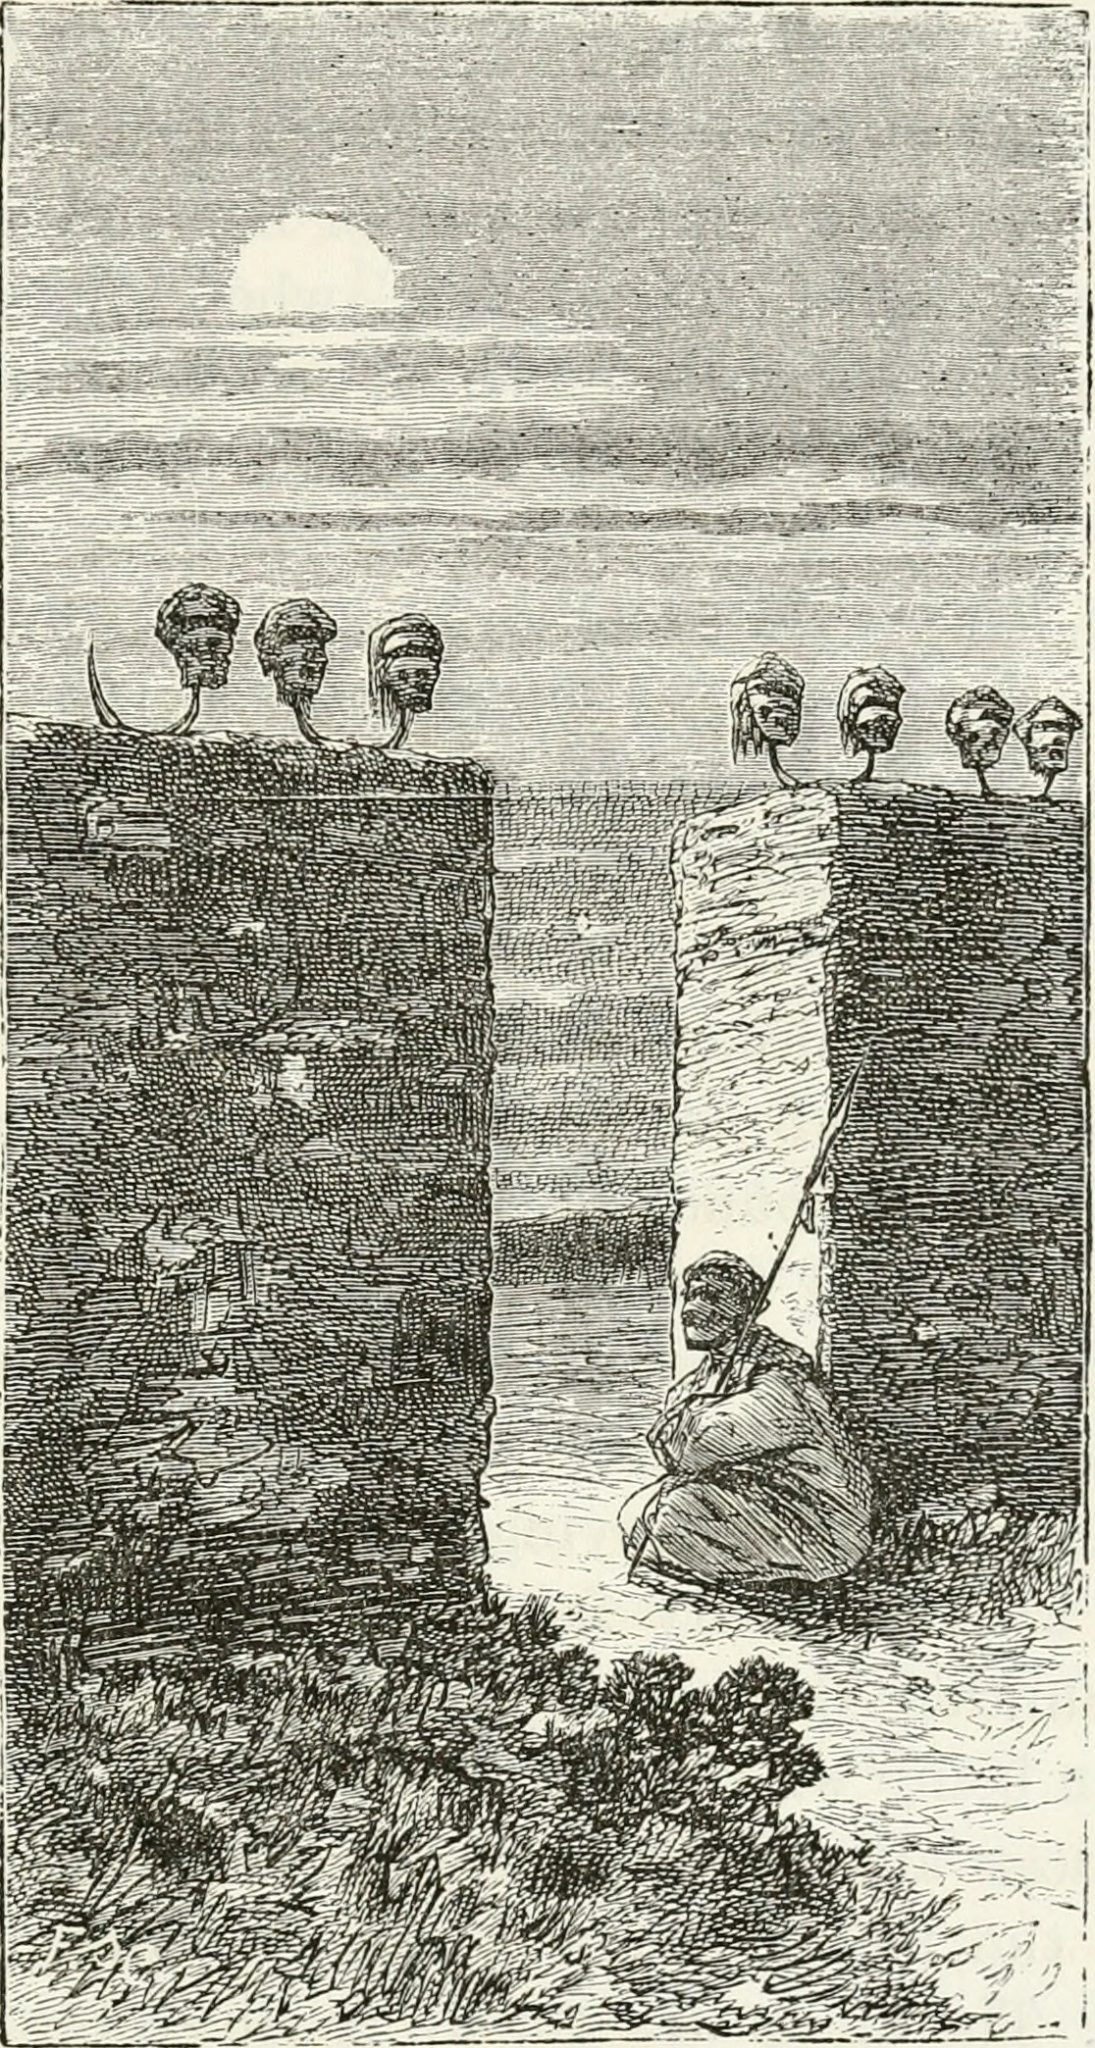 Image from page 202 of "Africa" (1878)